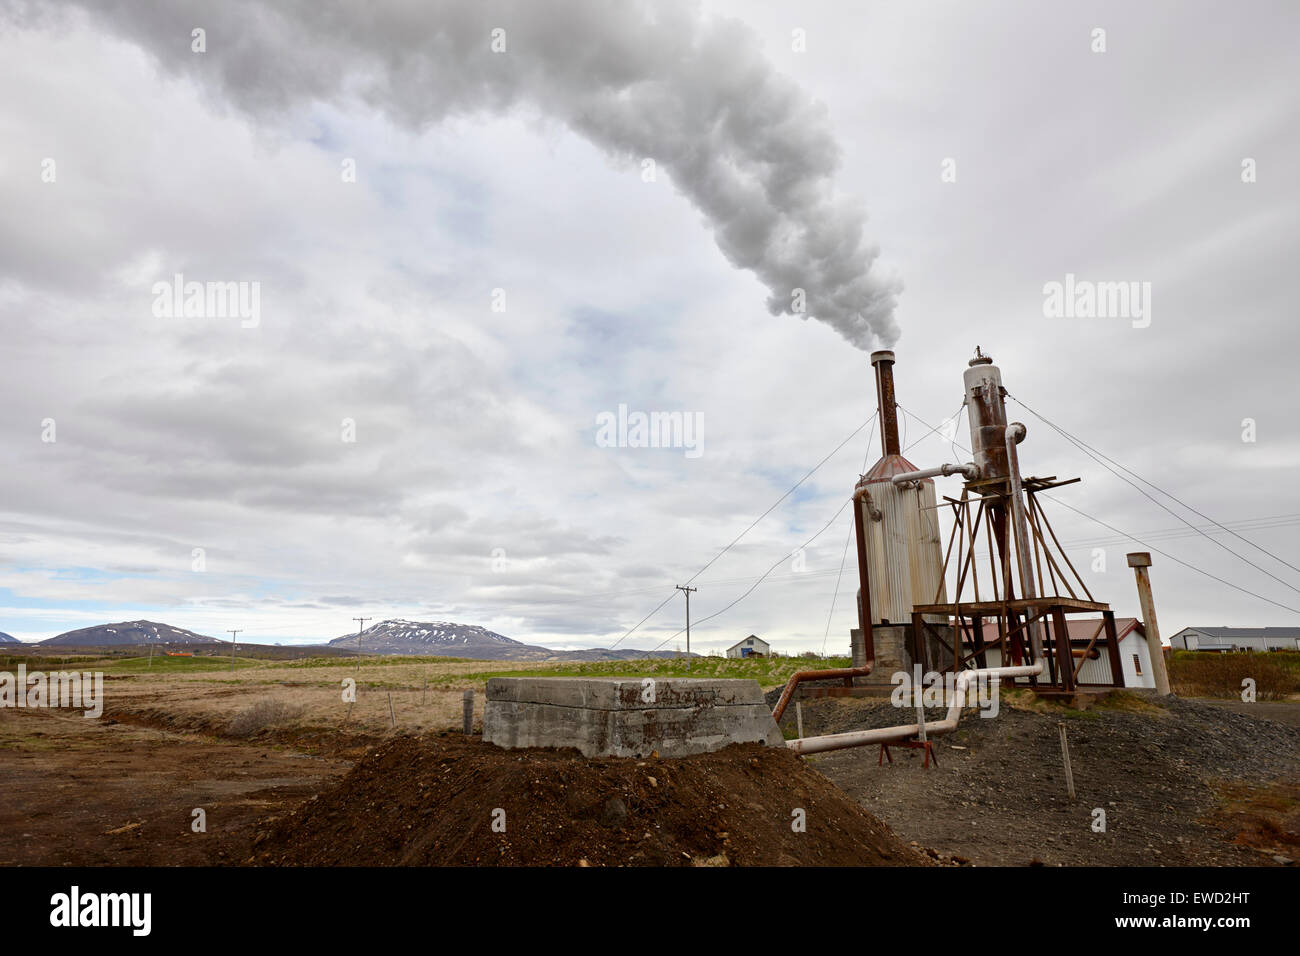 small rural community geothermal energy plant southern iceland Stock Photo